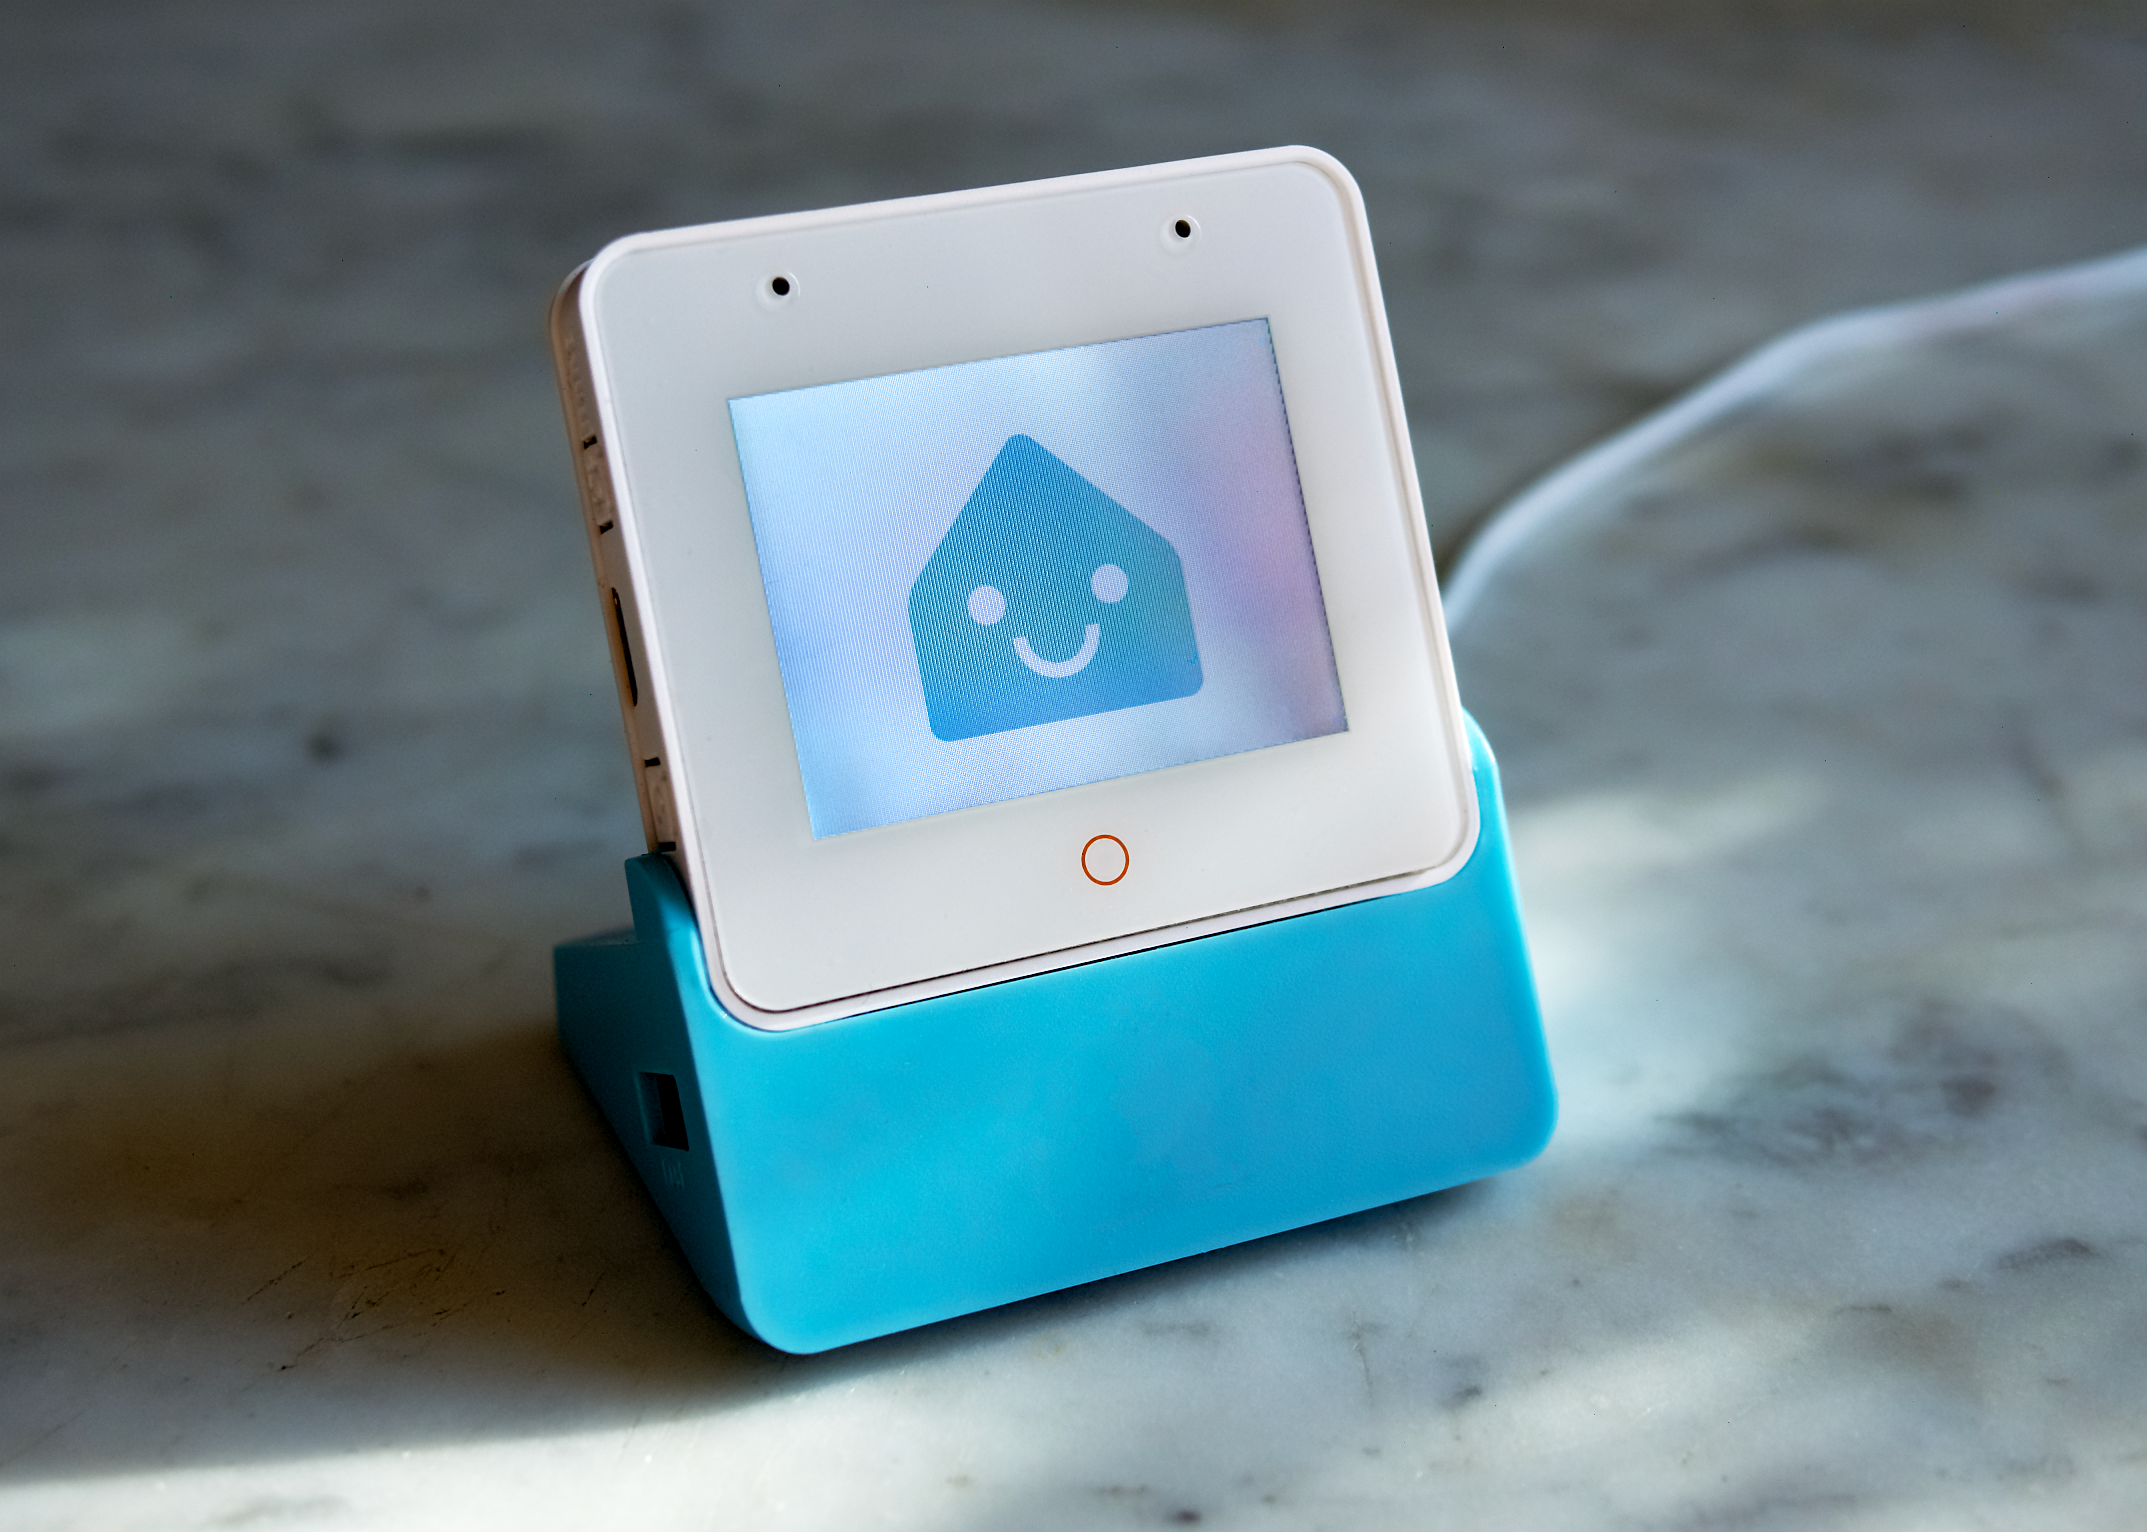 An ESP32-S3-Box-3 running the Home Assistant voice assistant, displaying the Home Assistant mascot, on a marble countertop